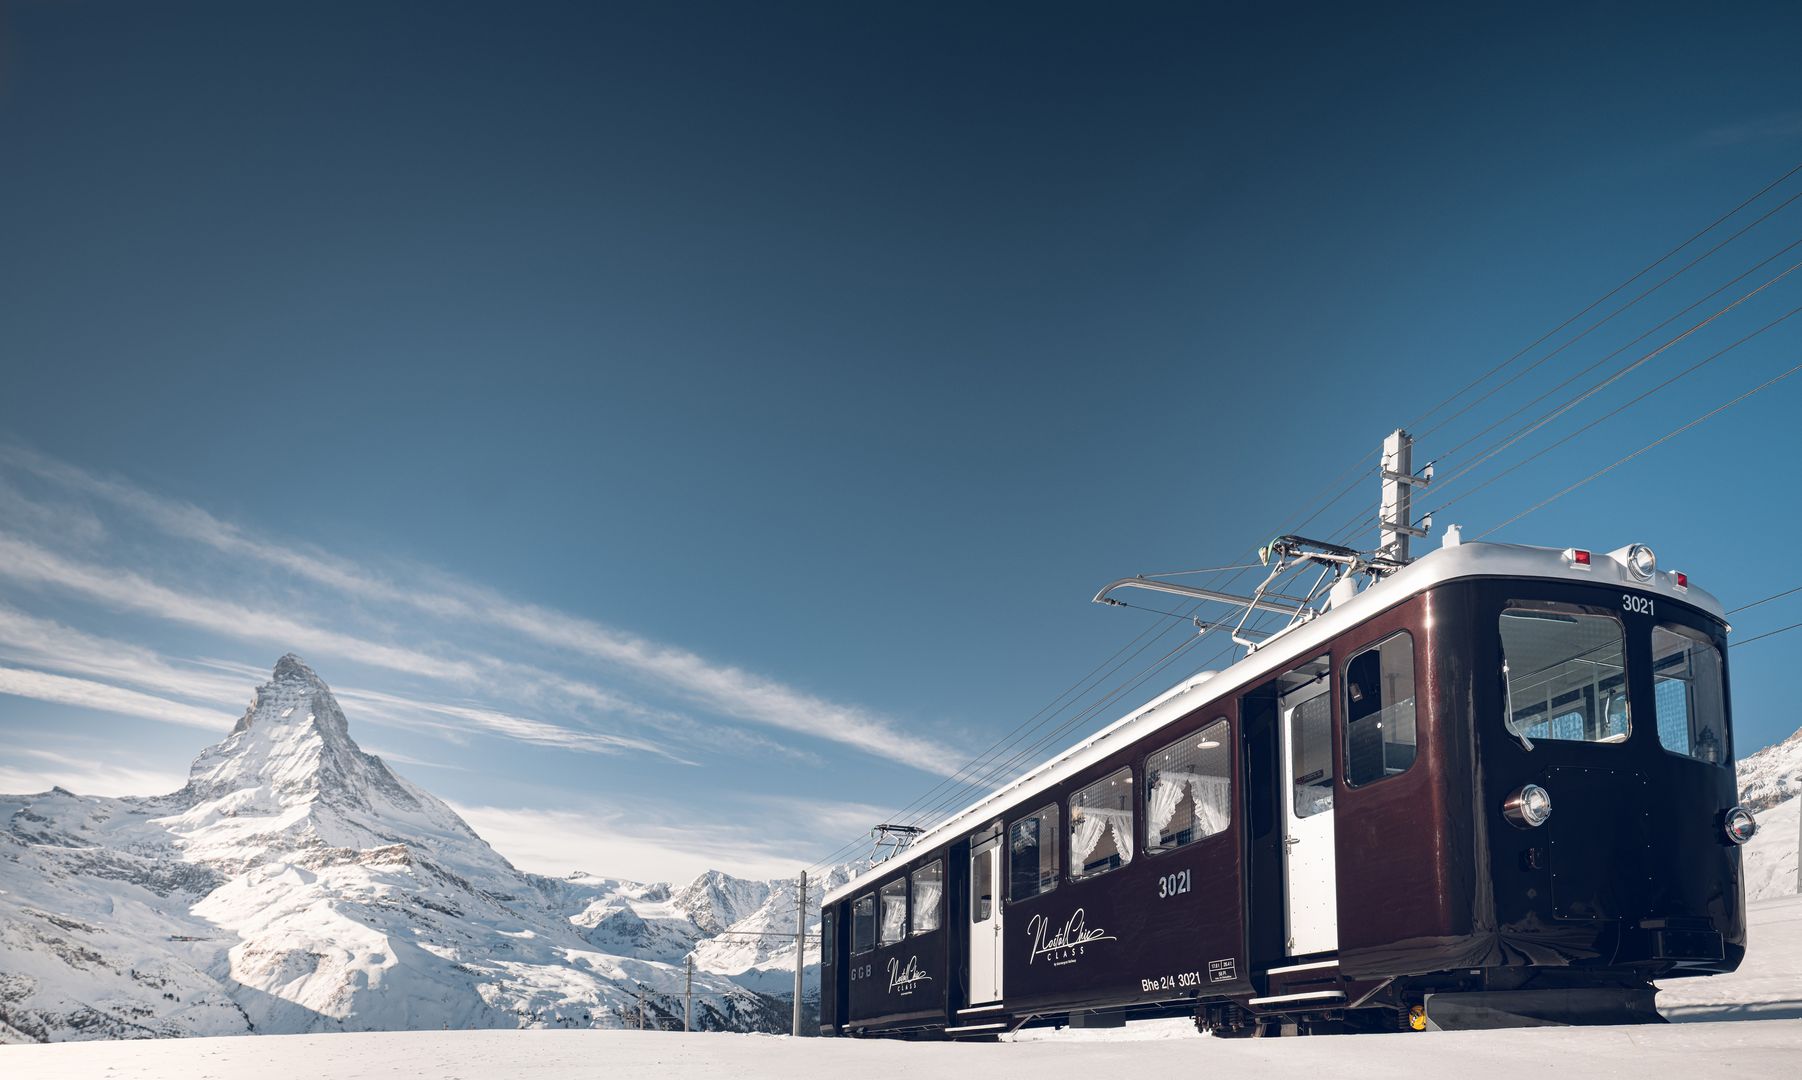 NostalChic Class carriages on the track in winter, view of the Matterhorn